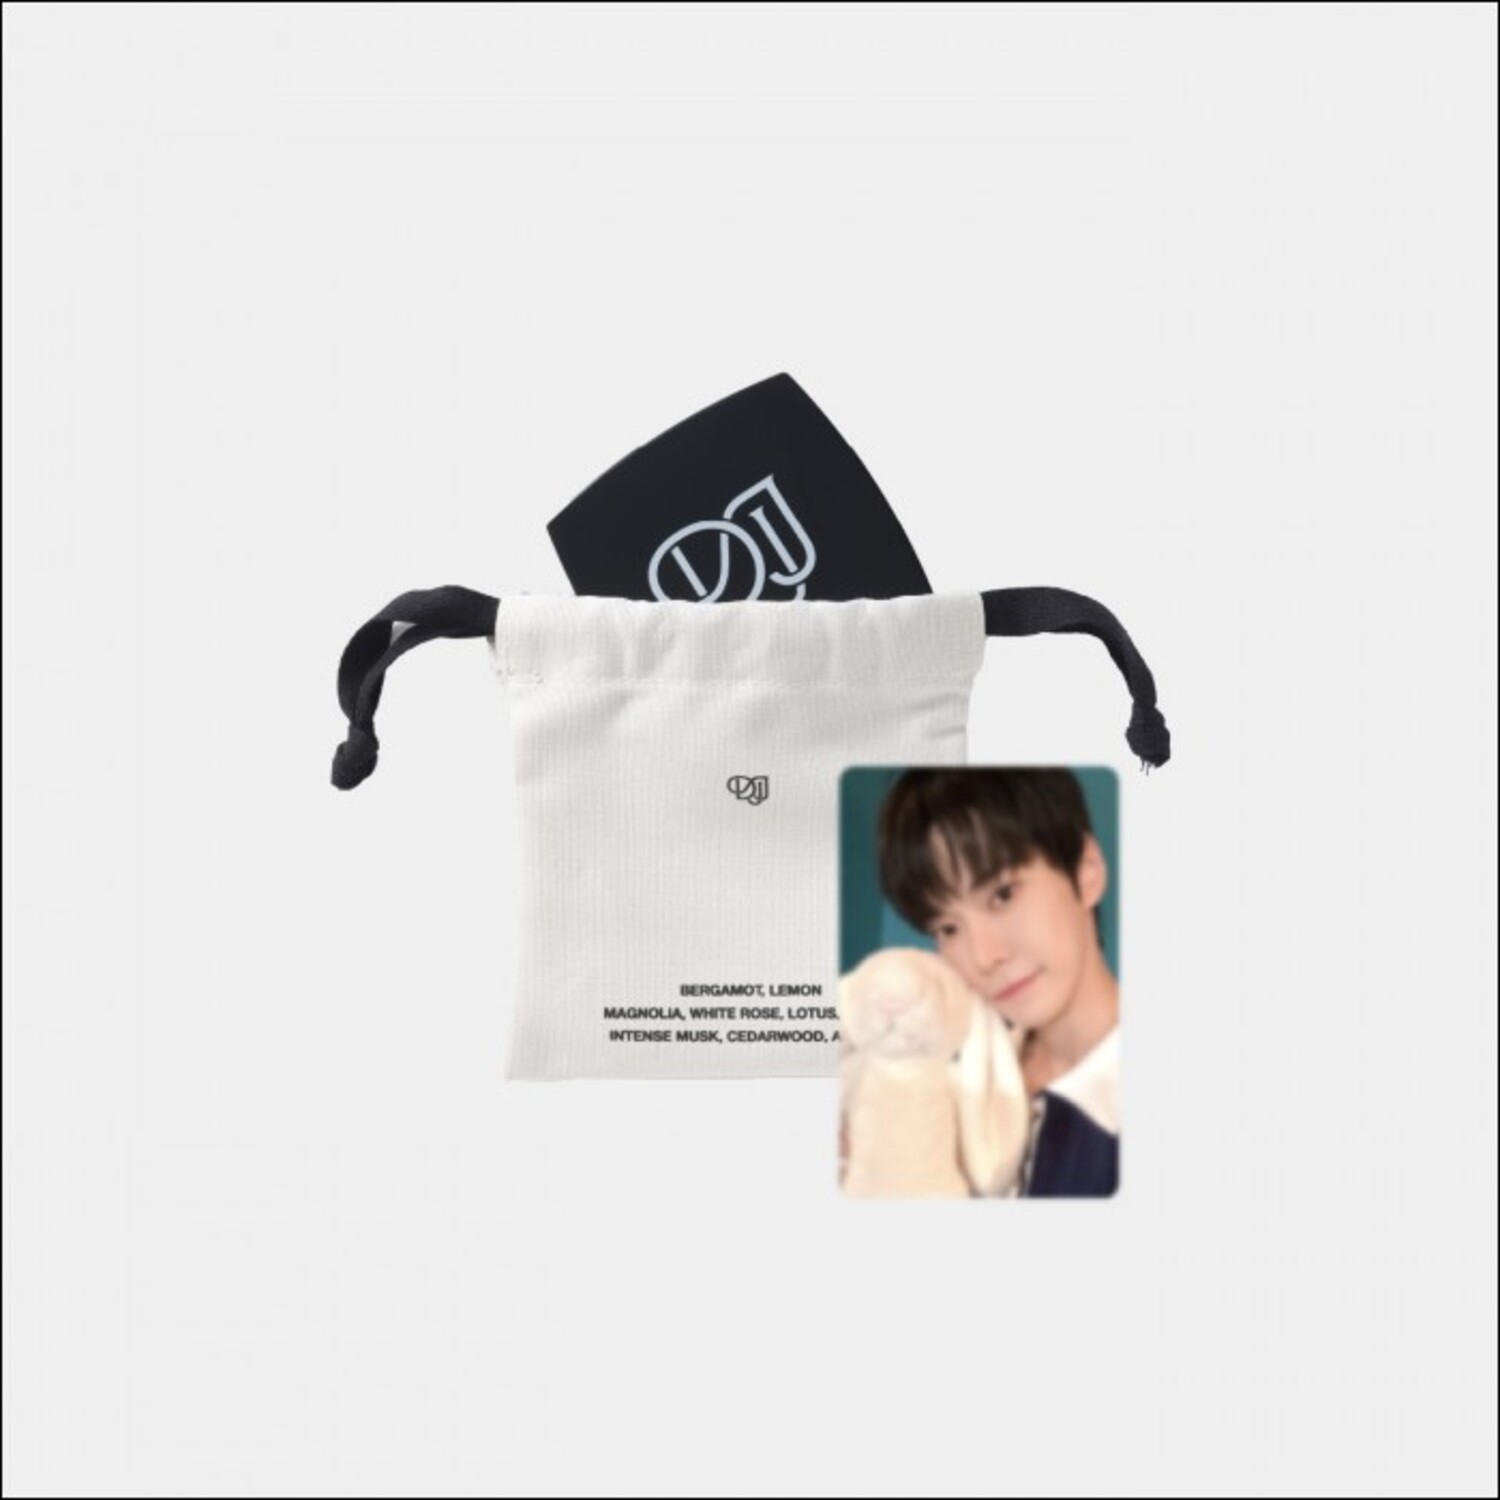 NCT 도재정(NCT DOJAEJUNG) flagship store [PERFUME] OFFICIAL MD - 손 거울 + 파우치 세트 HAND MIRROR + POUCH SET